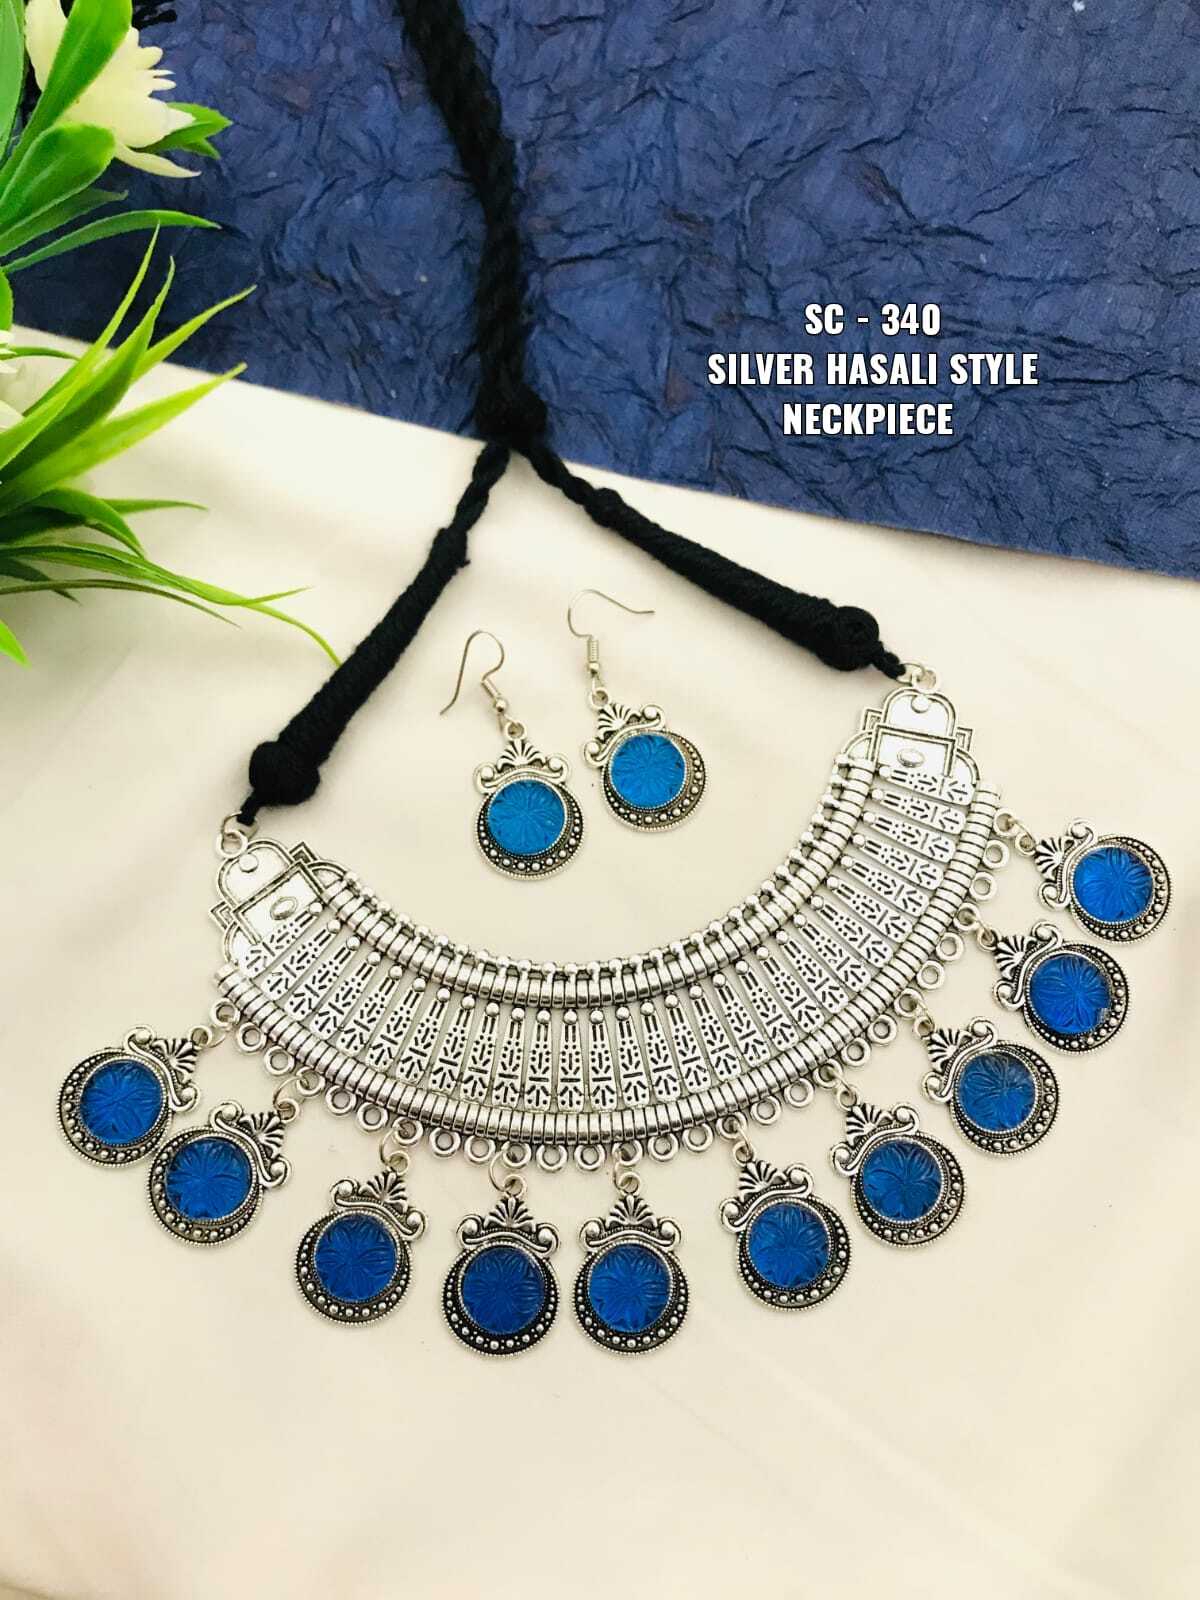 Silver Hasli style Necklace